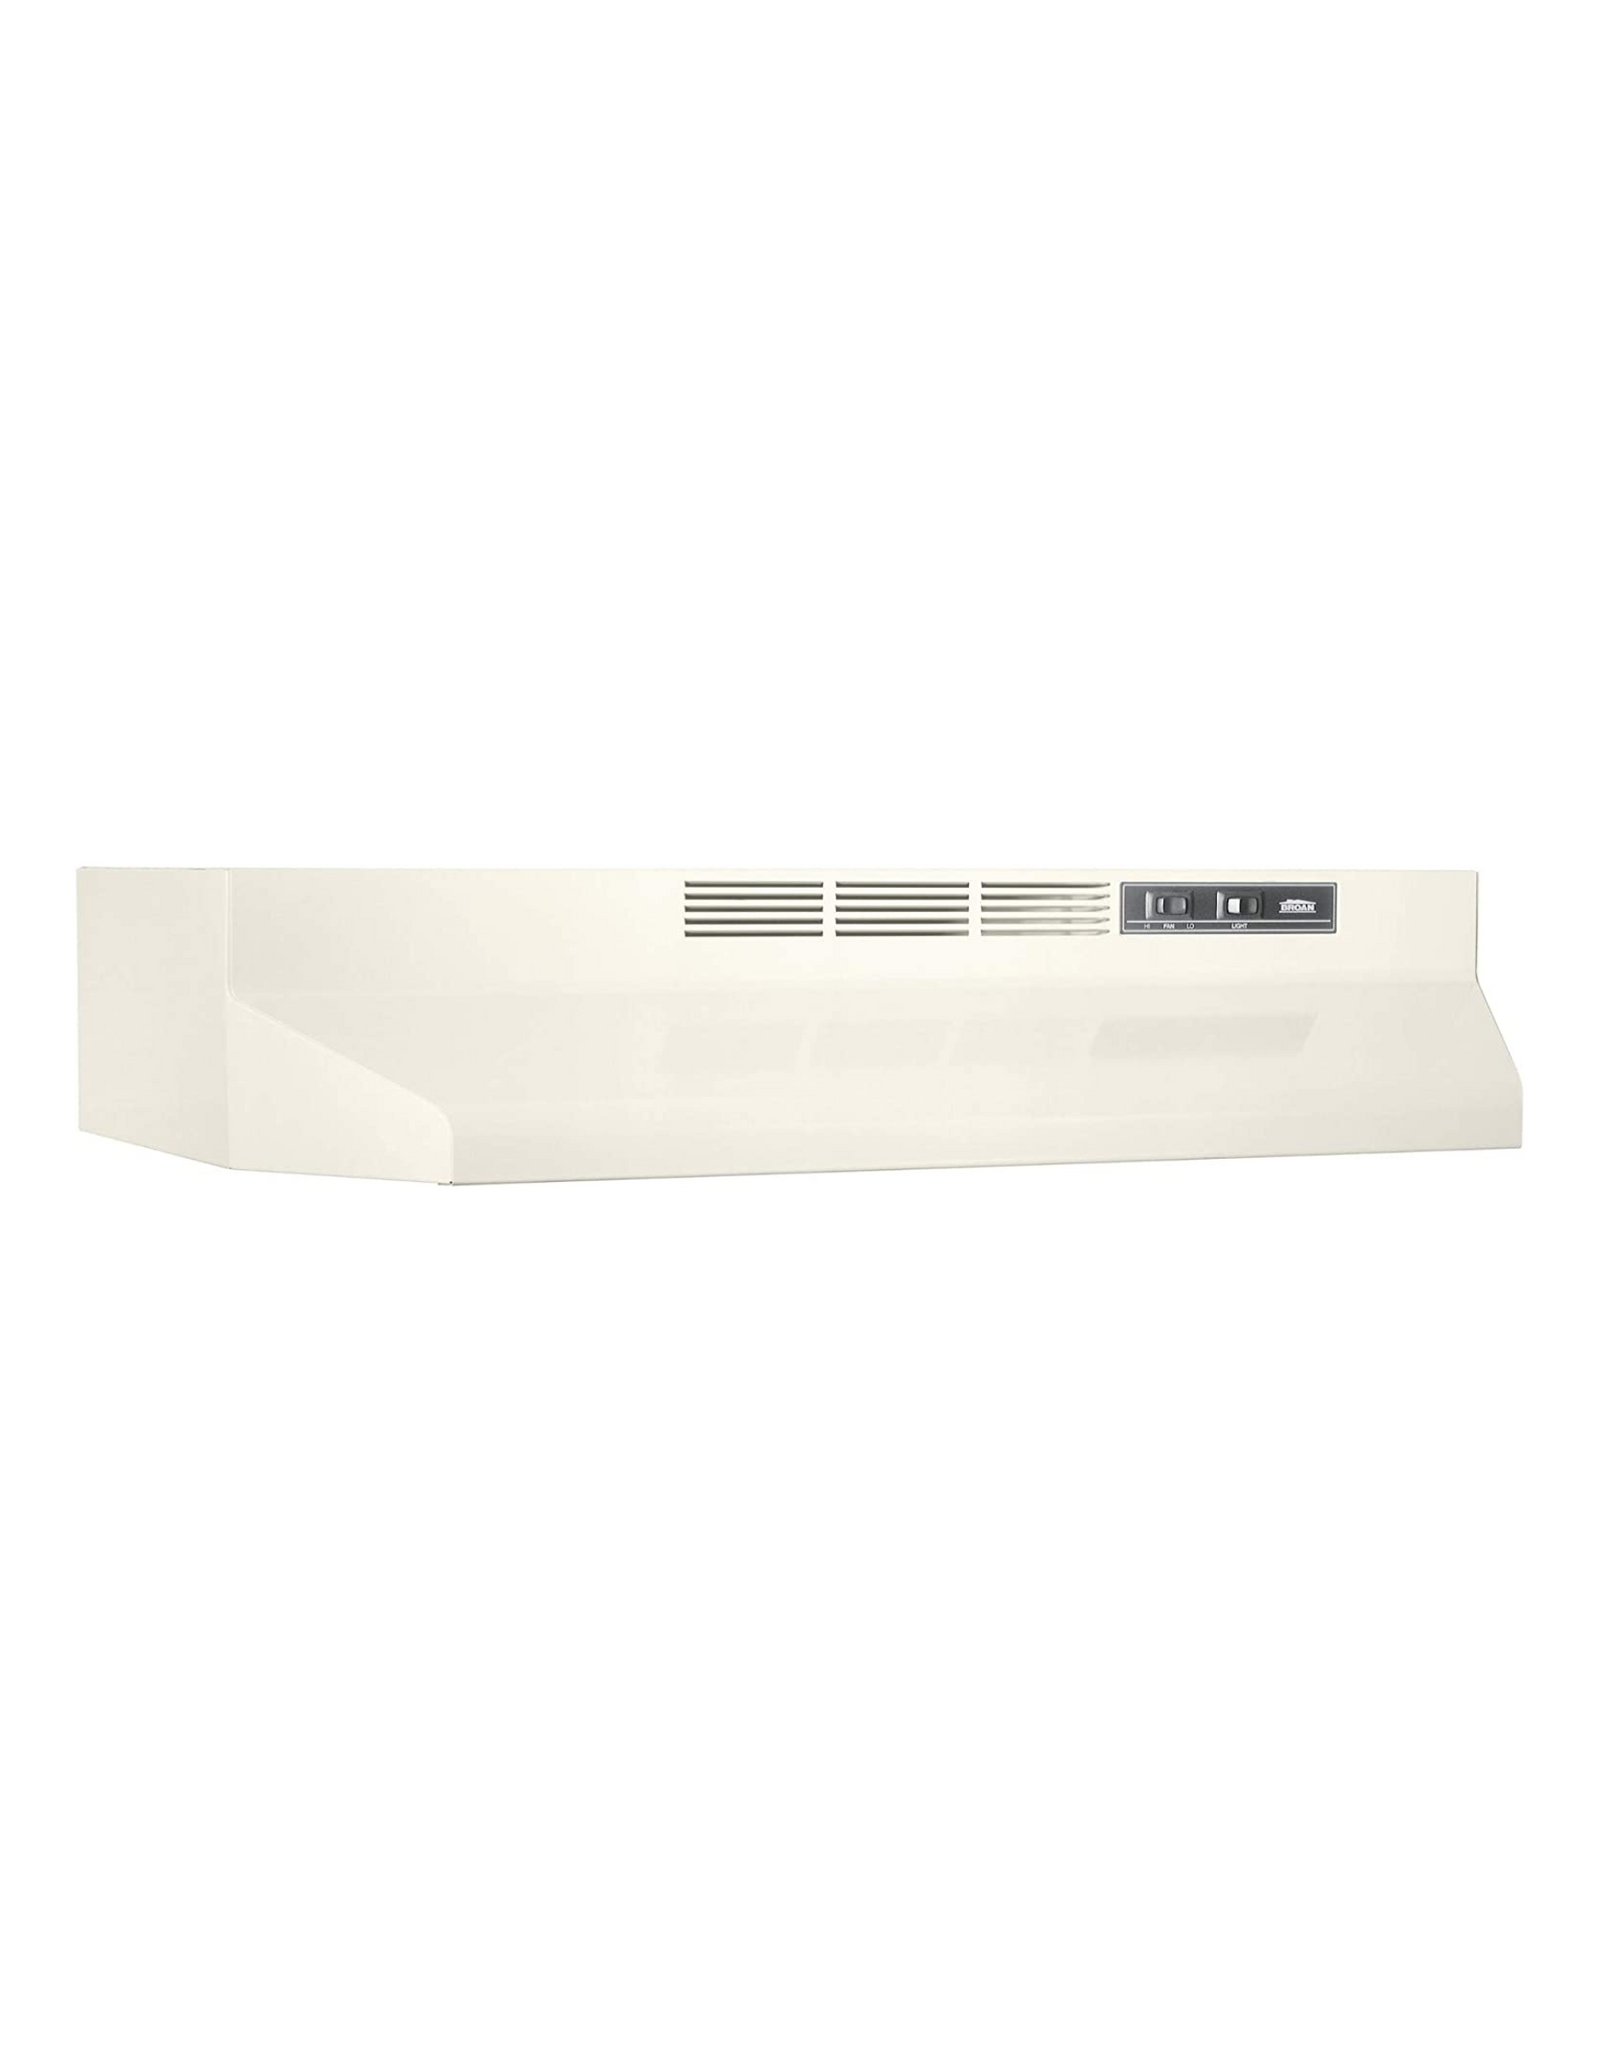 Broan-NuTone 412402 Non-Ducted Under-Cabinet Ductless Range Hood Insert, 24", Bisque